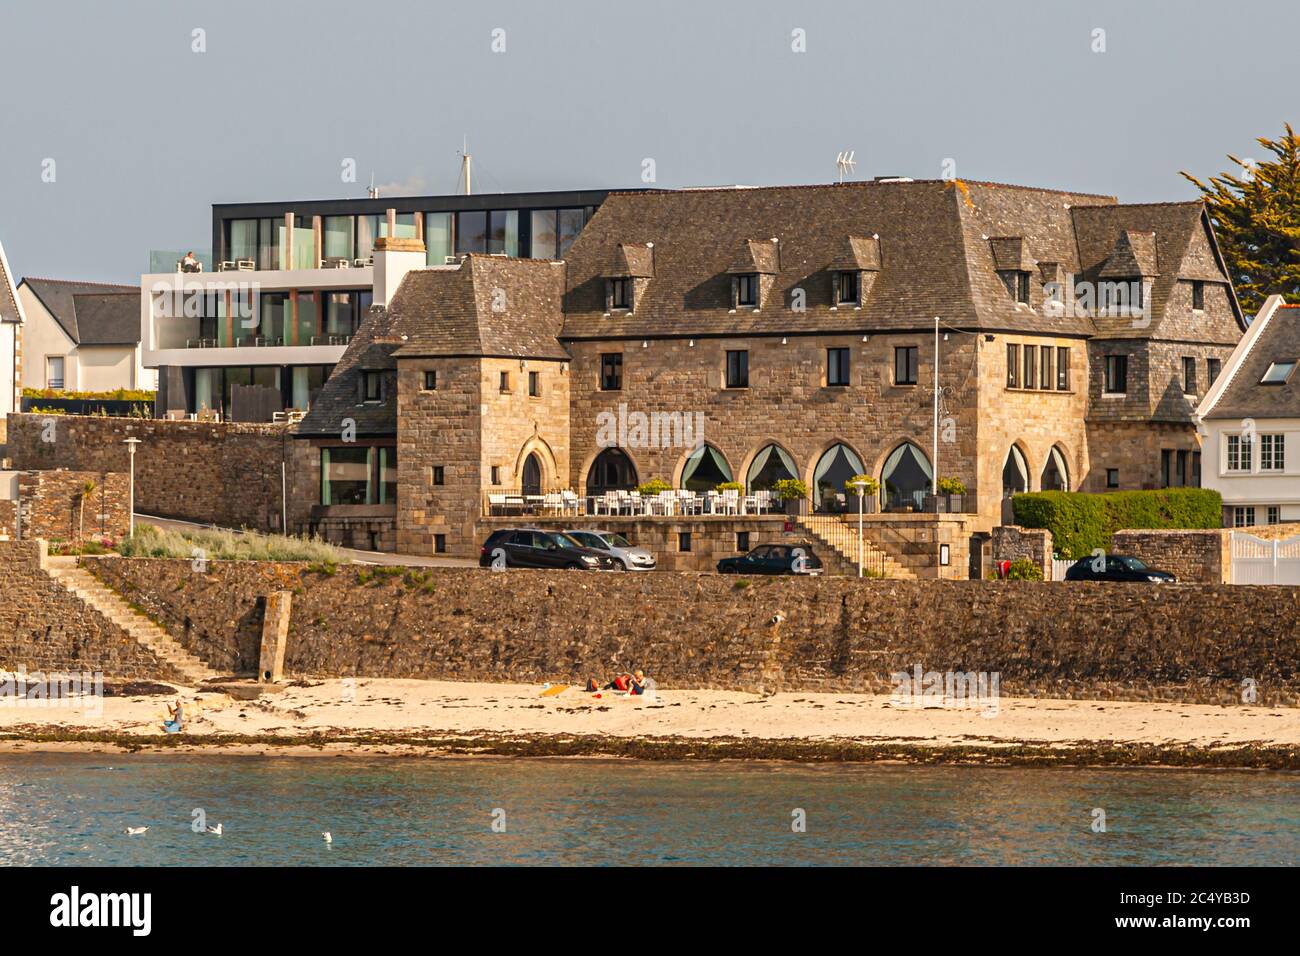 The Relais & Chateaux Hotel Brittany & Spa is located on the promenade with a small sandy beach in Roscoff, Morlaix, France Stock Photo